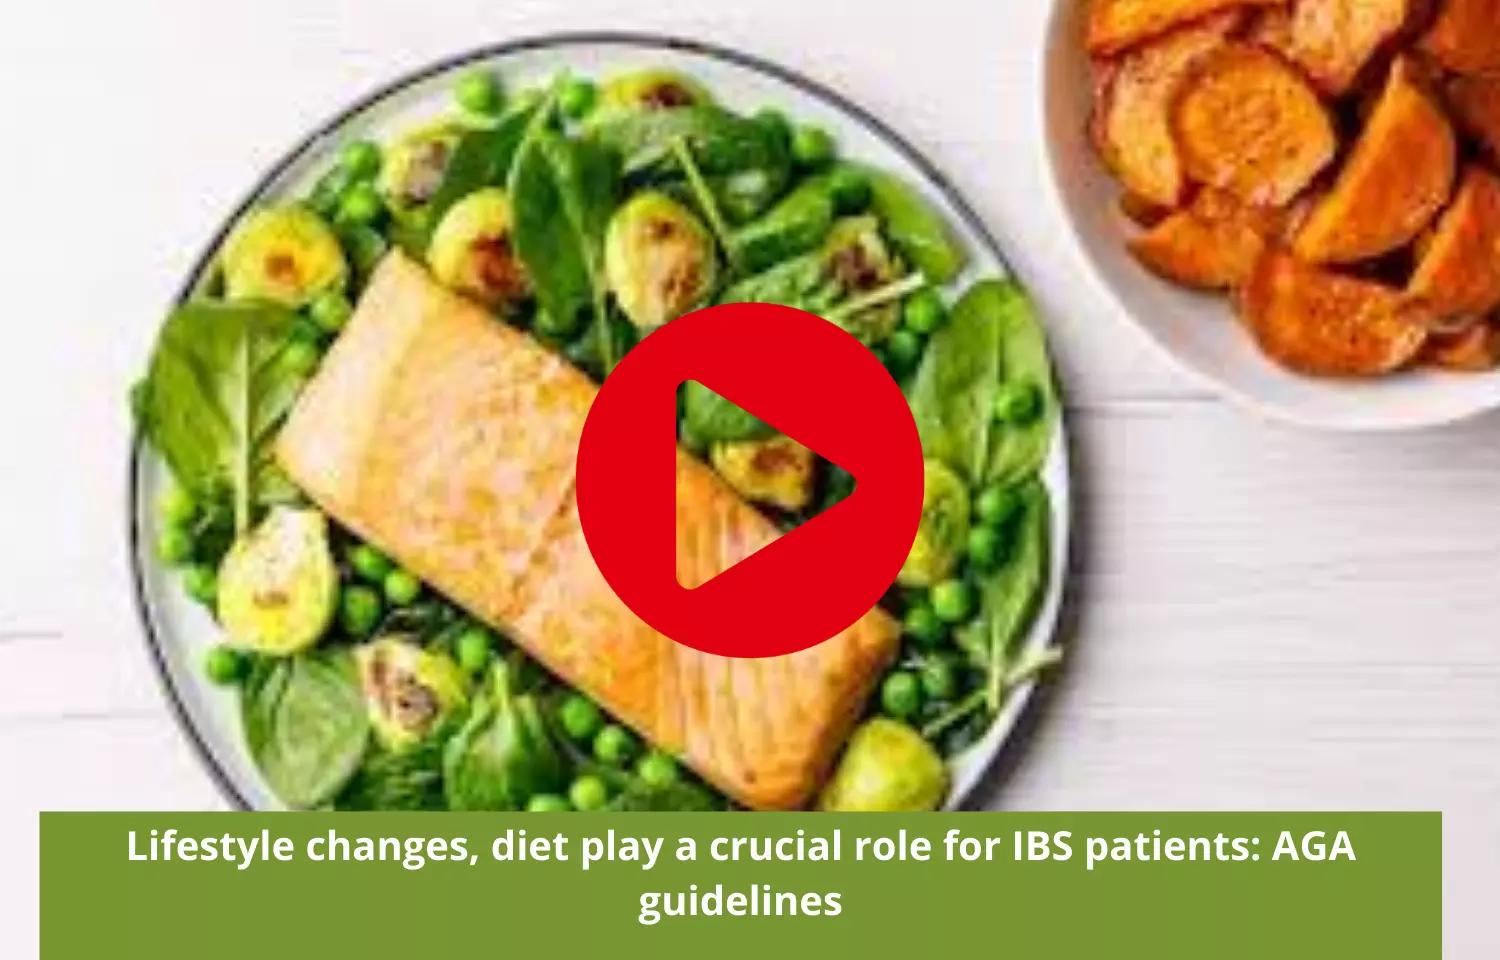 Lifestyle changes, diet play a crucial role for IBS patients: AGA guidelines